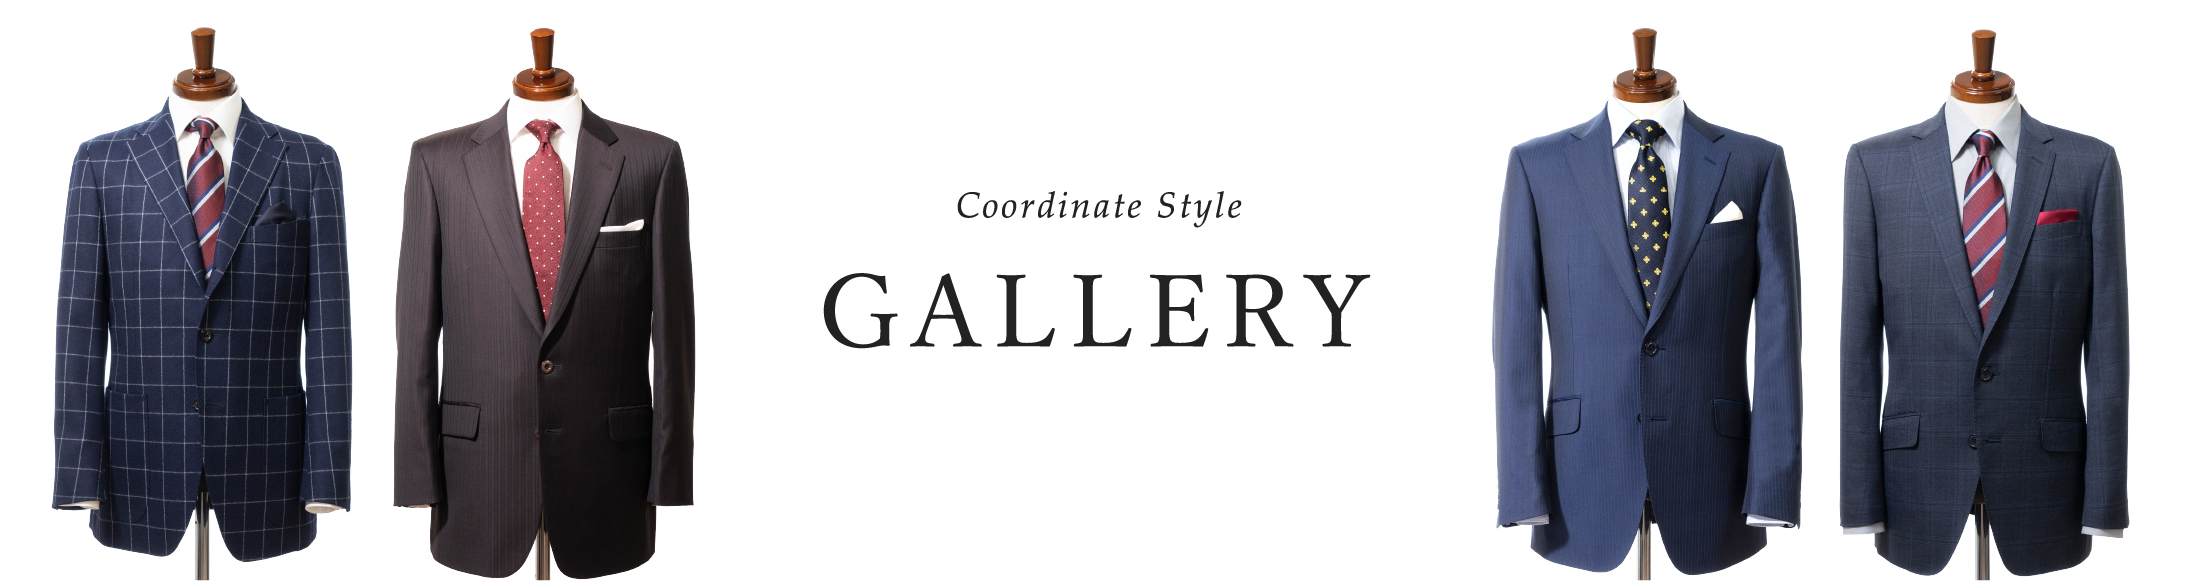 Coordinate Style GALLERY